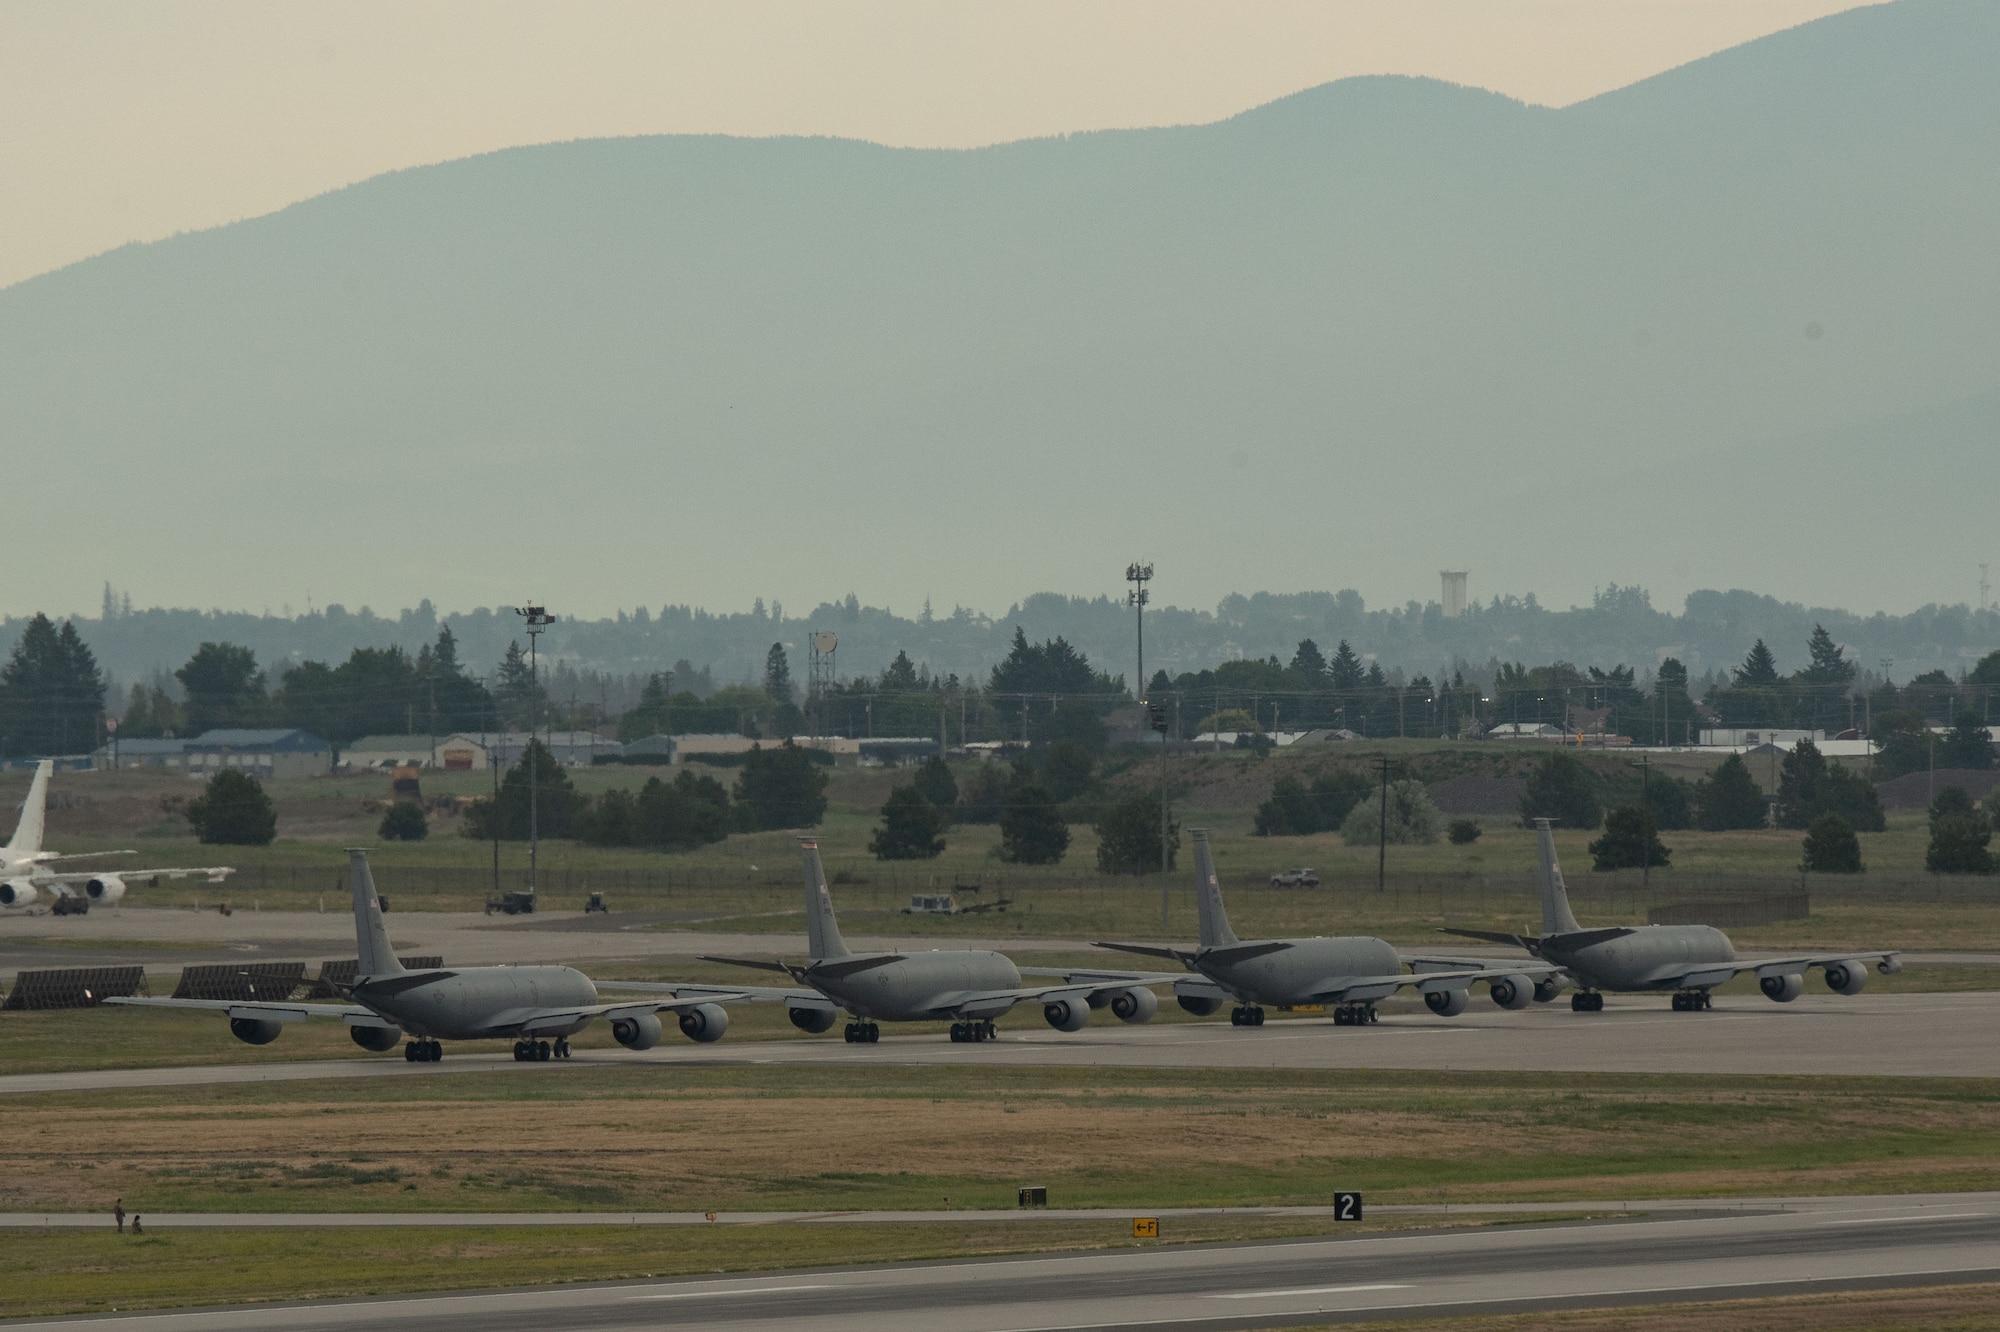 Four KC-135 Stratotankers taxi into position before minimum-interval takeoffs as part of Operation Centennial Contact at Fairchild Air Force Base, Washington, June 27, 2023. The movement, which included stops at Yellowstone National Park, Mount Rushmore and Glacier National Park, was part of Air Mobility Command’s celebration of 100 years air refueling operations and demonstrated the 92nd Air Refueling Wing’s global reach capabilities. Since its inception in 1923, Air refueling has become a crucial component of military and civilian aviation operations around the world by extending the range and endurance of aircraft and enabling them to complete missions that would otherwise be impossible or require multiple stops. As a result, this capability is essential for strategic and tactical operations, as well as humanitarian relief efforts in support of AMC, U.S. Transportation Command and Department of Defense priorities. (U.S. Air Force photo by Airman 1st Class Clare Werner)